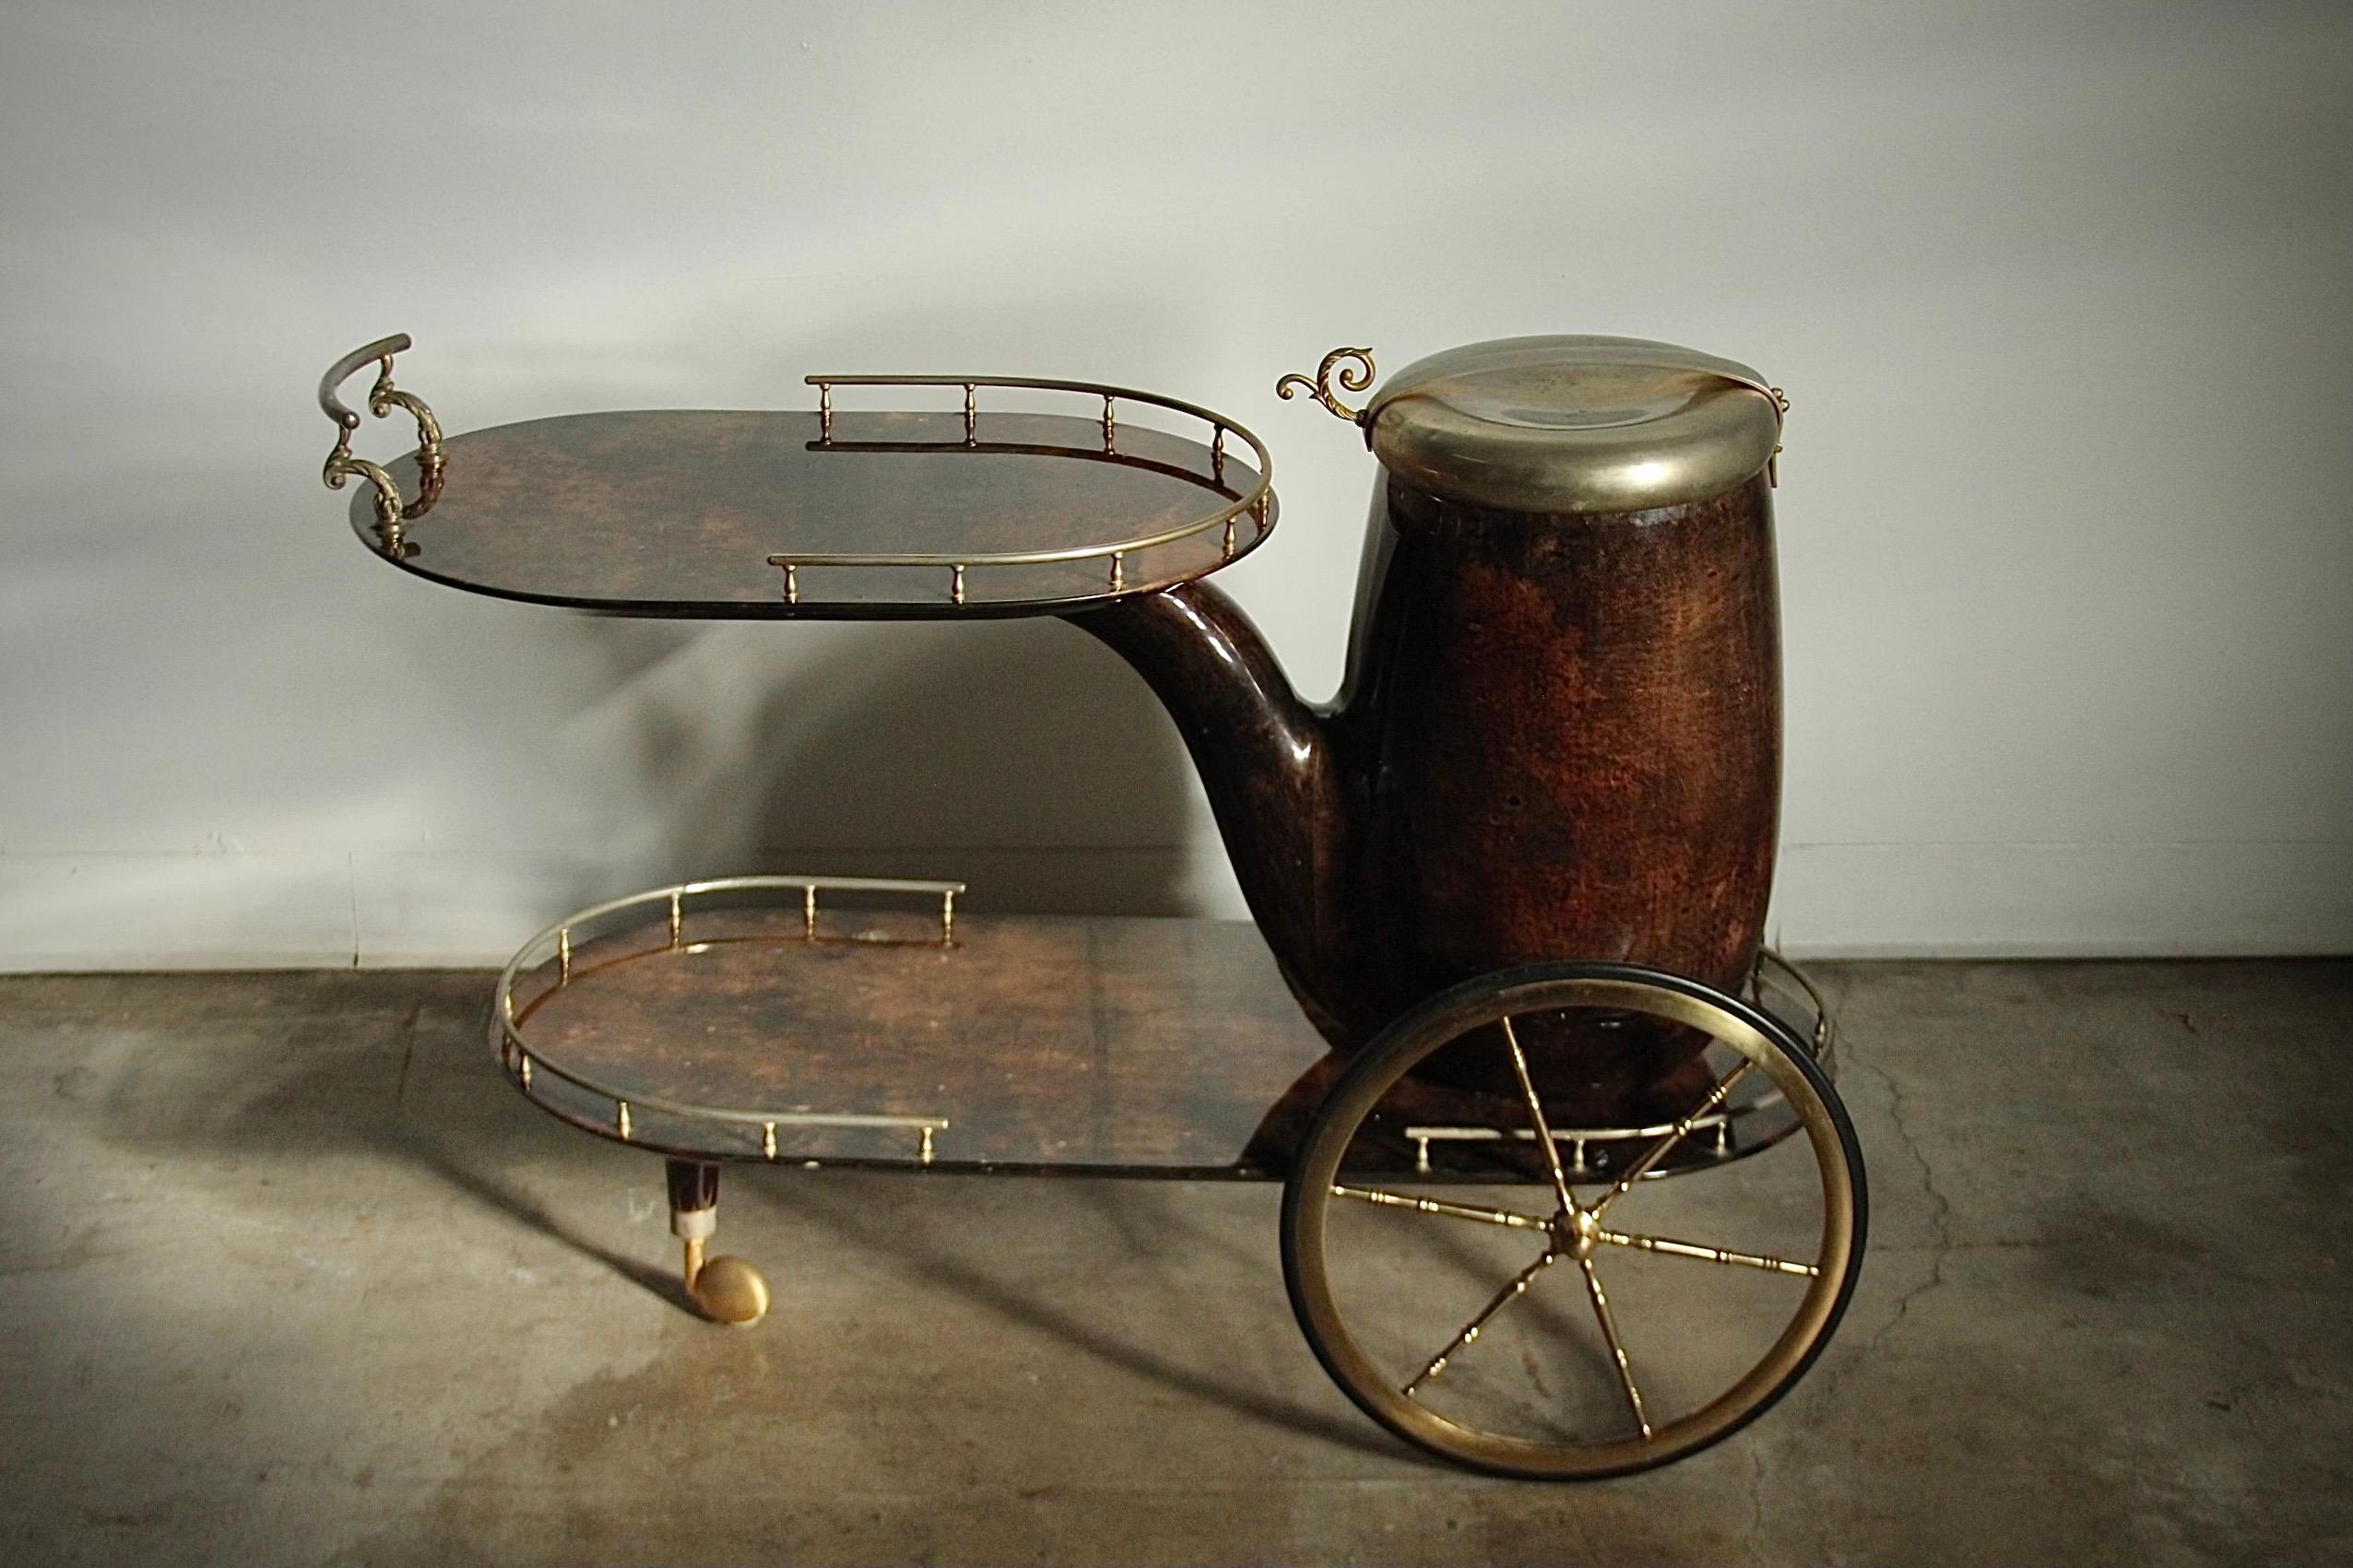 A fantastic pipe form bar cart by Aldo Tura in dyed and lacquered goatskin and brass detailing, circa 1960s. The large brass lidded pipe head serves as bottle storage or a wine/champagne cooler, with ample room for ~5 bottles. This uncommon, 1-owner